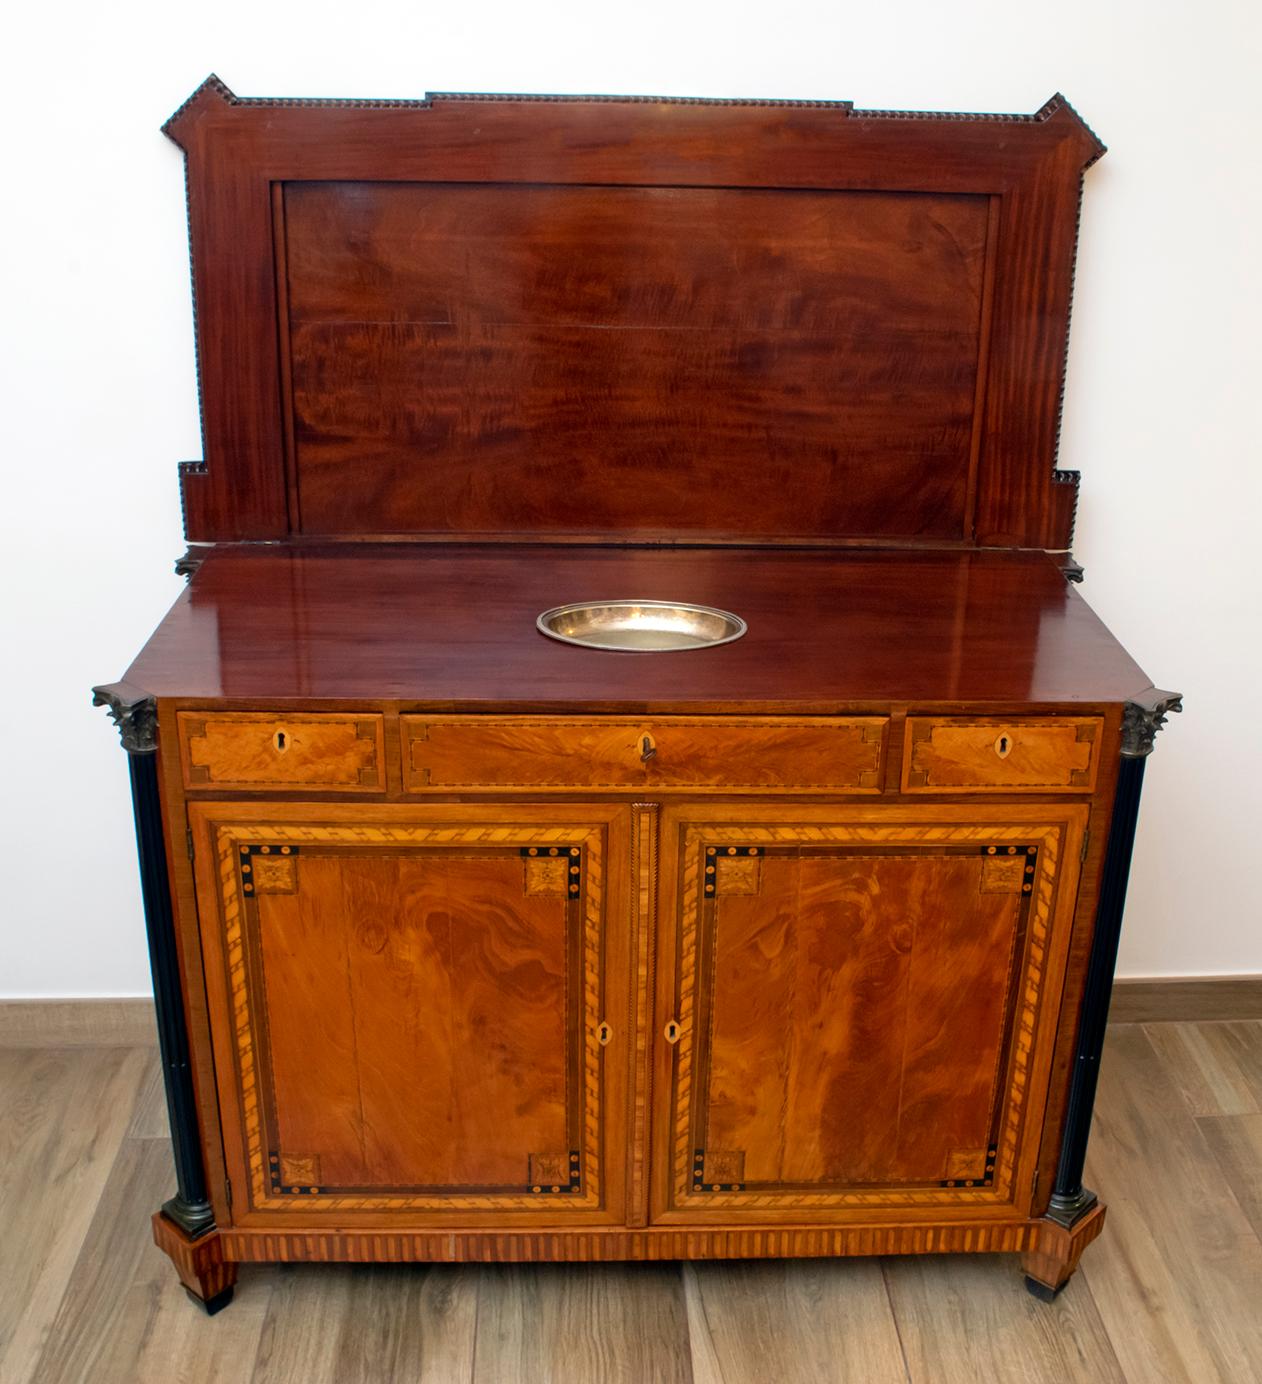 Napoleon III French Sideboard Inlaid with Geometric Floral Motifs, 1850 In Good Condition For Sale In Puglia, Puglia